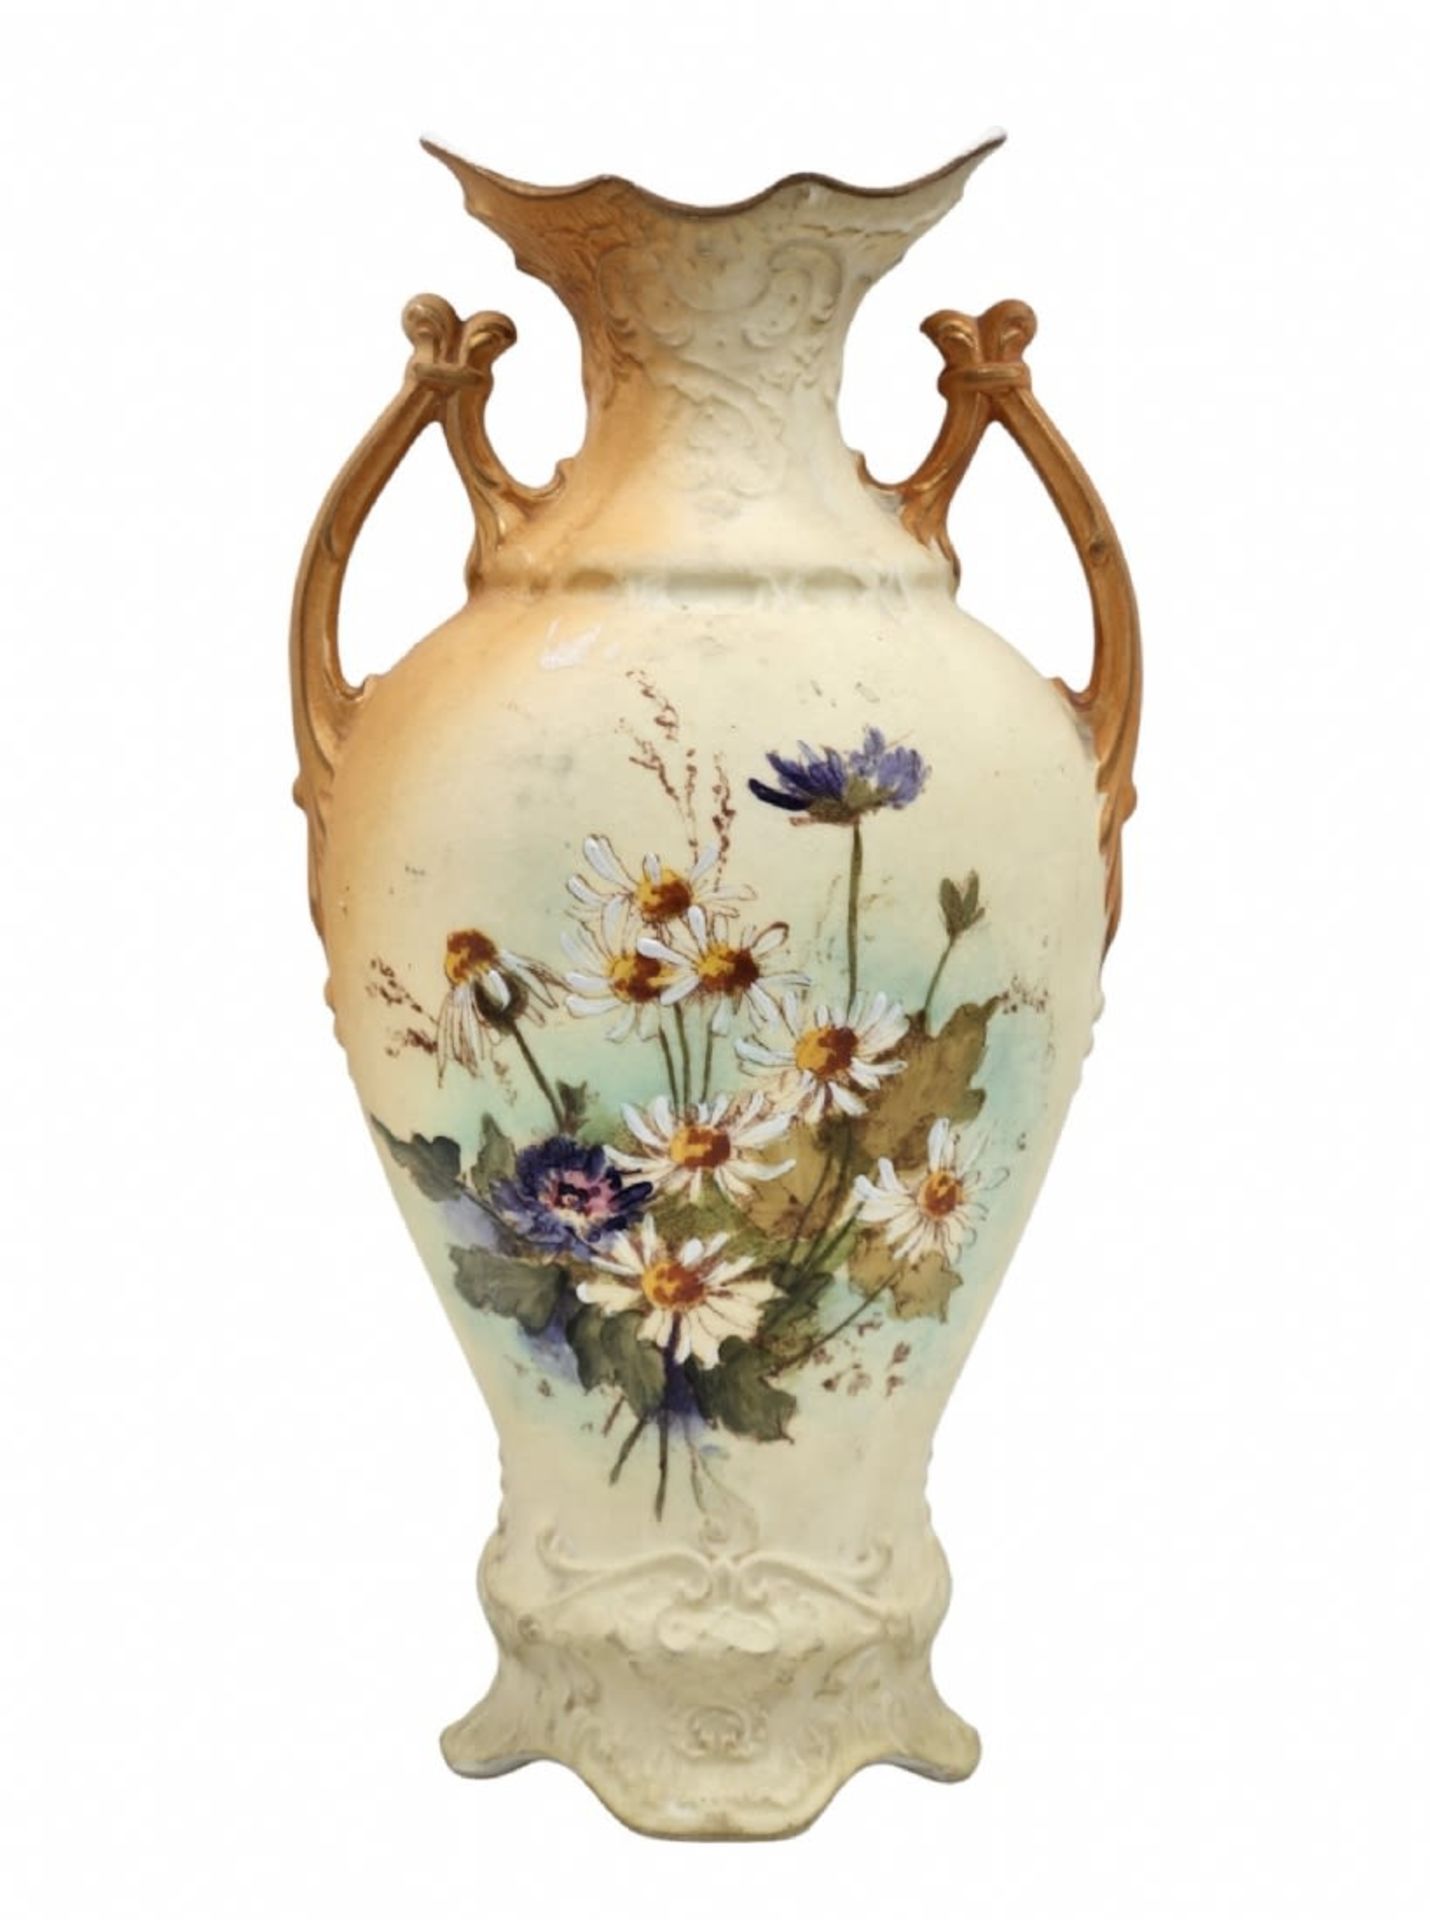 An antique Austrian vase from the last quarter of the 19th century, made of porcelain decorated,